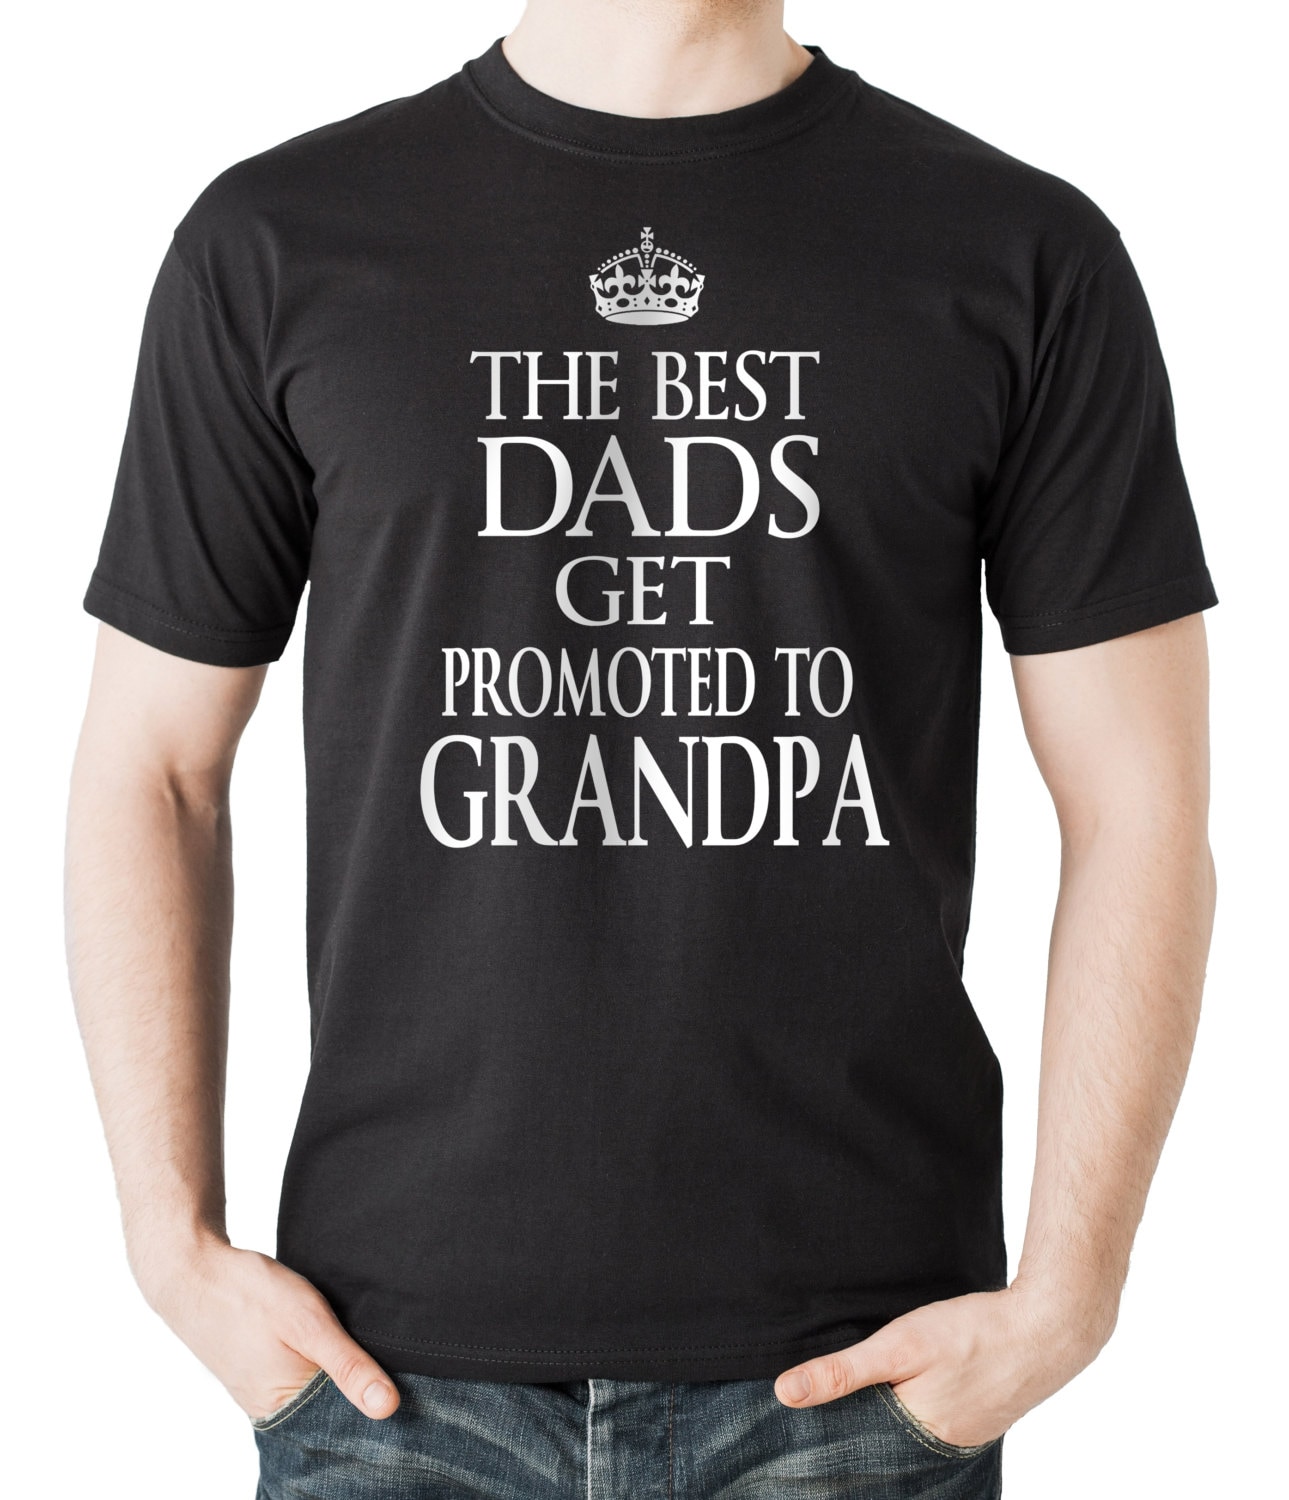 The Best Dads Get Promoted to Grandpa T-shirt Baby | Etsy